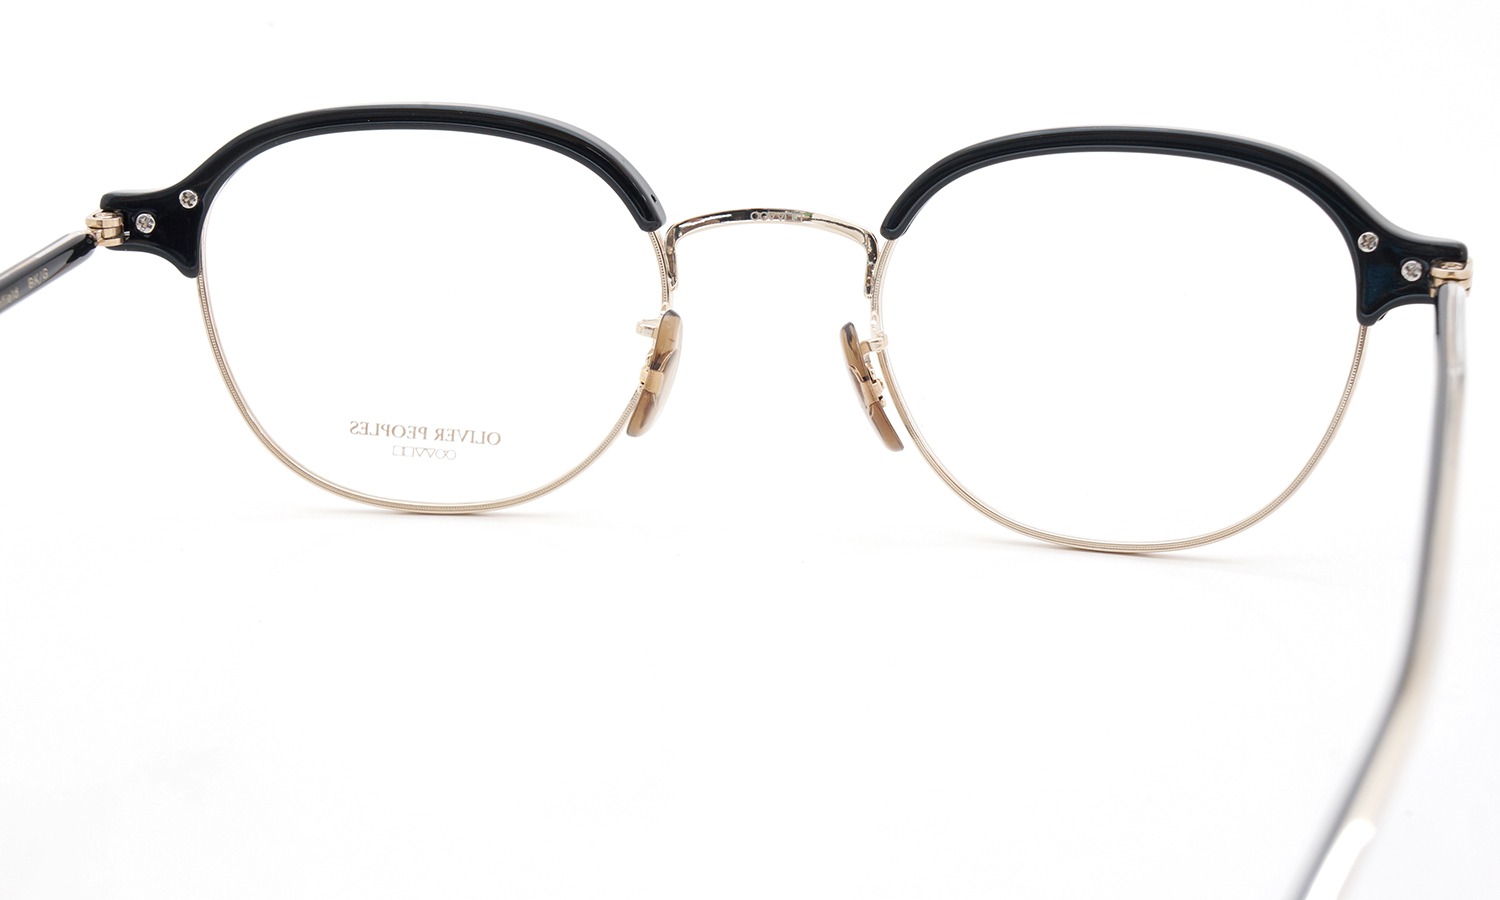 OLIVER PEOPLES オリバーピープルズ メガネ Canfield BK/g 7